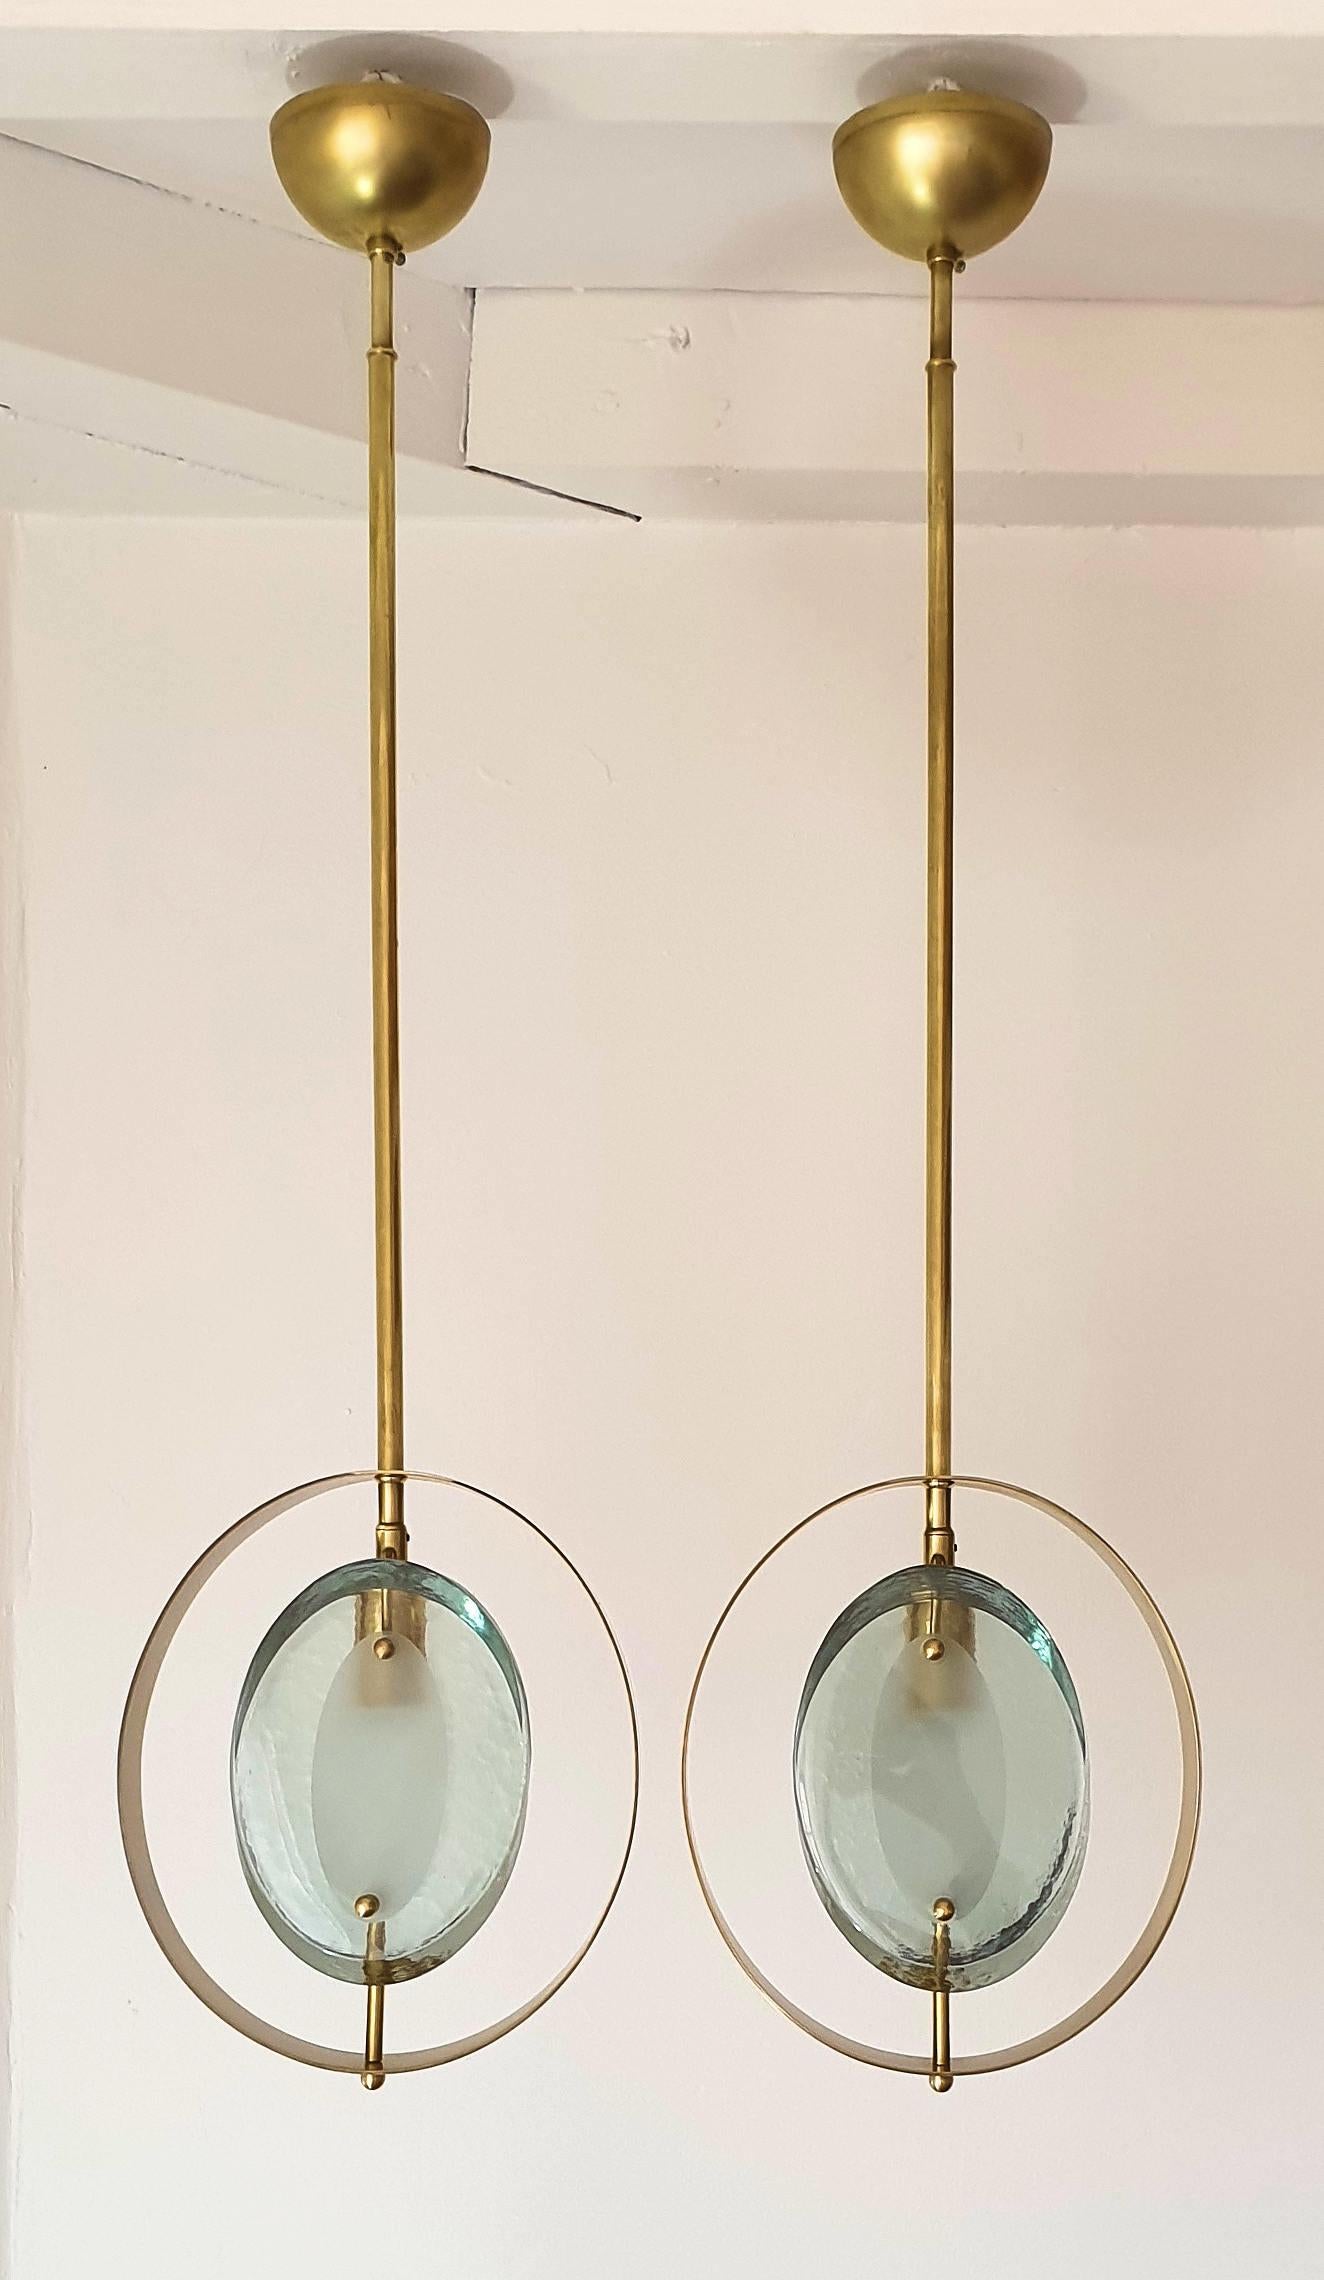 Pair of Mid-Century Modern, polished brass and green glass pendants, in the style of model 1933, by Max Ingrand for Fontana Arte, Italy, 1961.
They have 1 light each and have been rewired for the US.
The height of the stem can be changed.
Size: